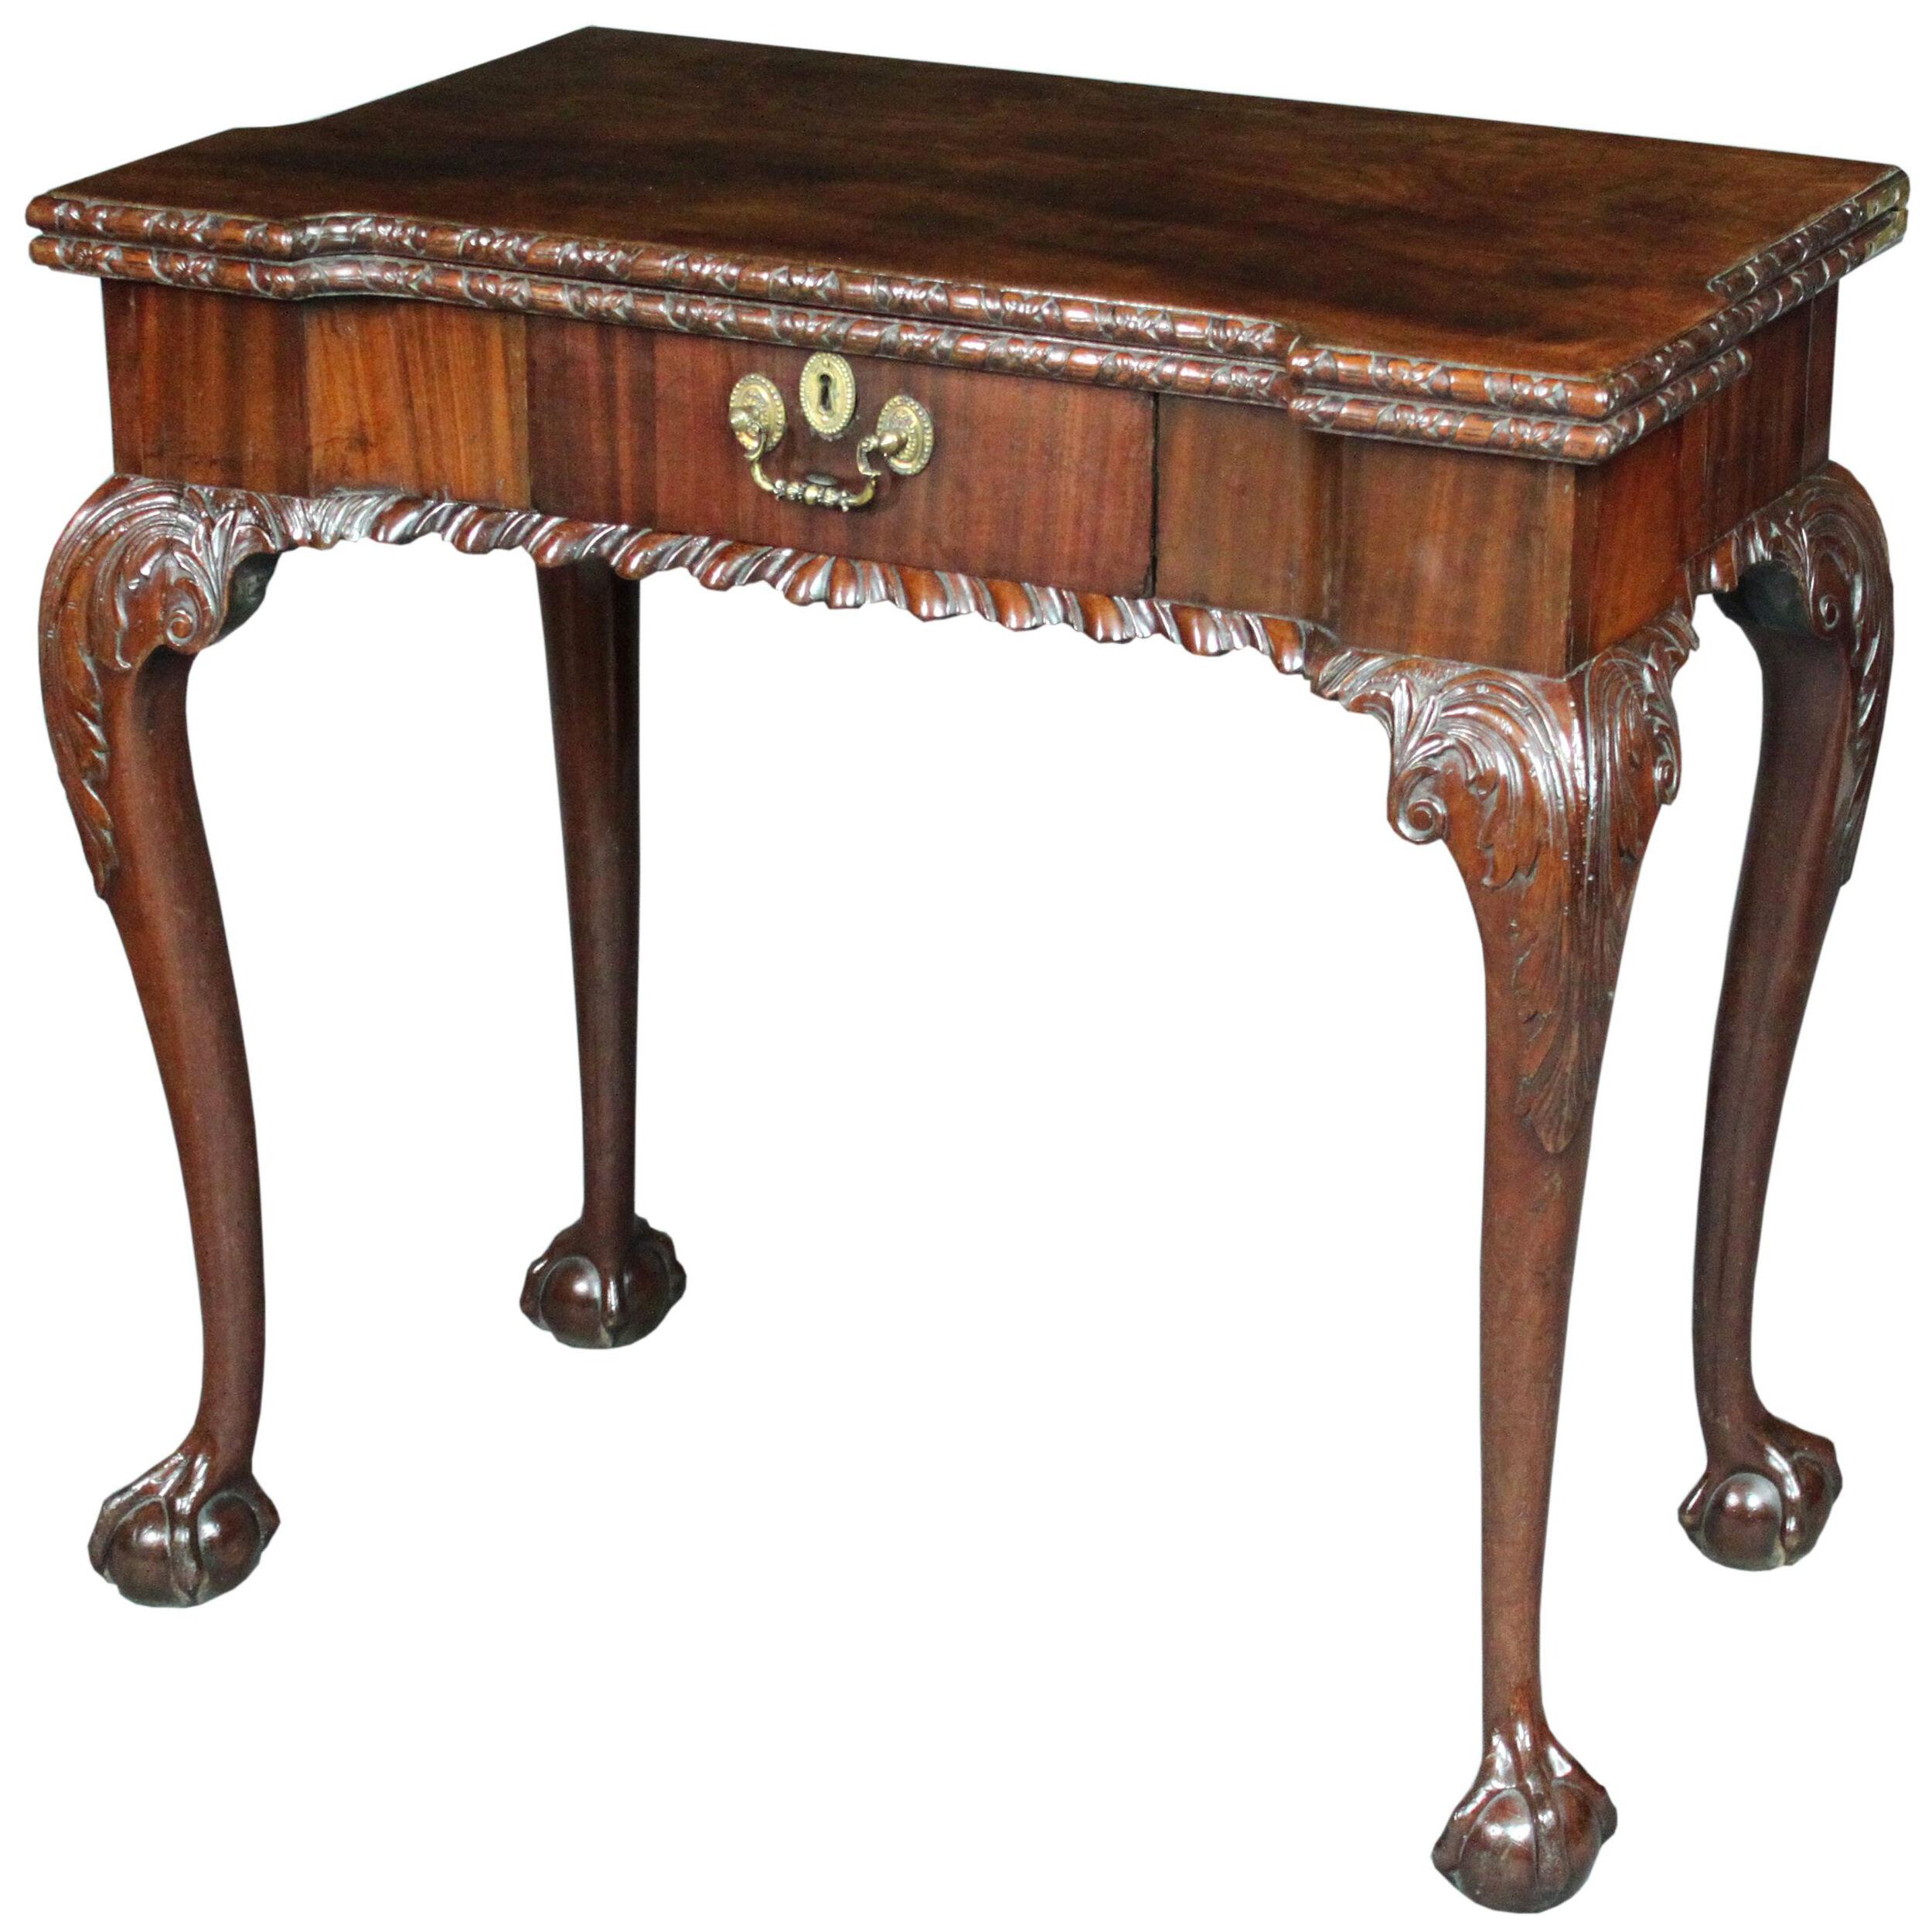 George II Chippendale Period Mahogany Card Table